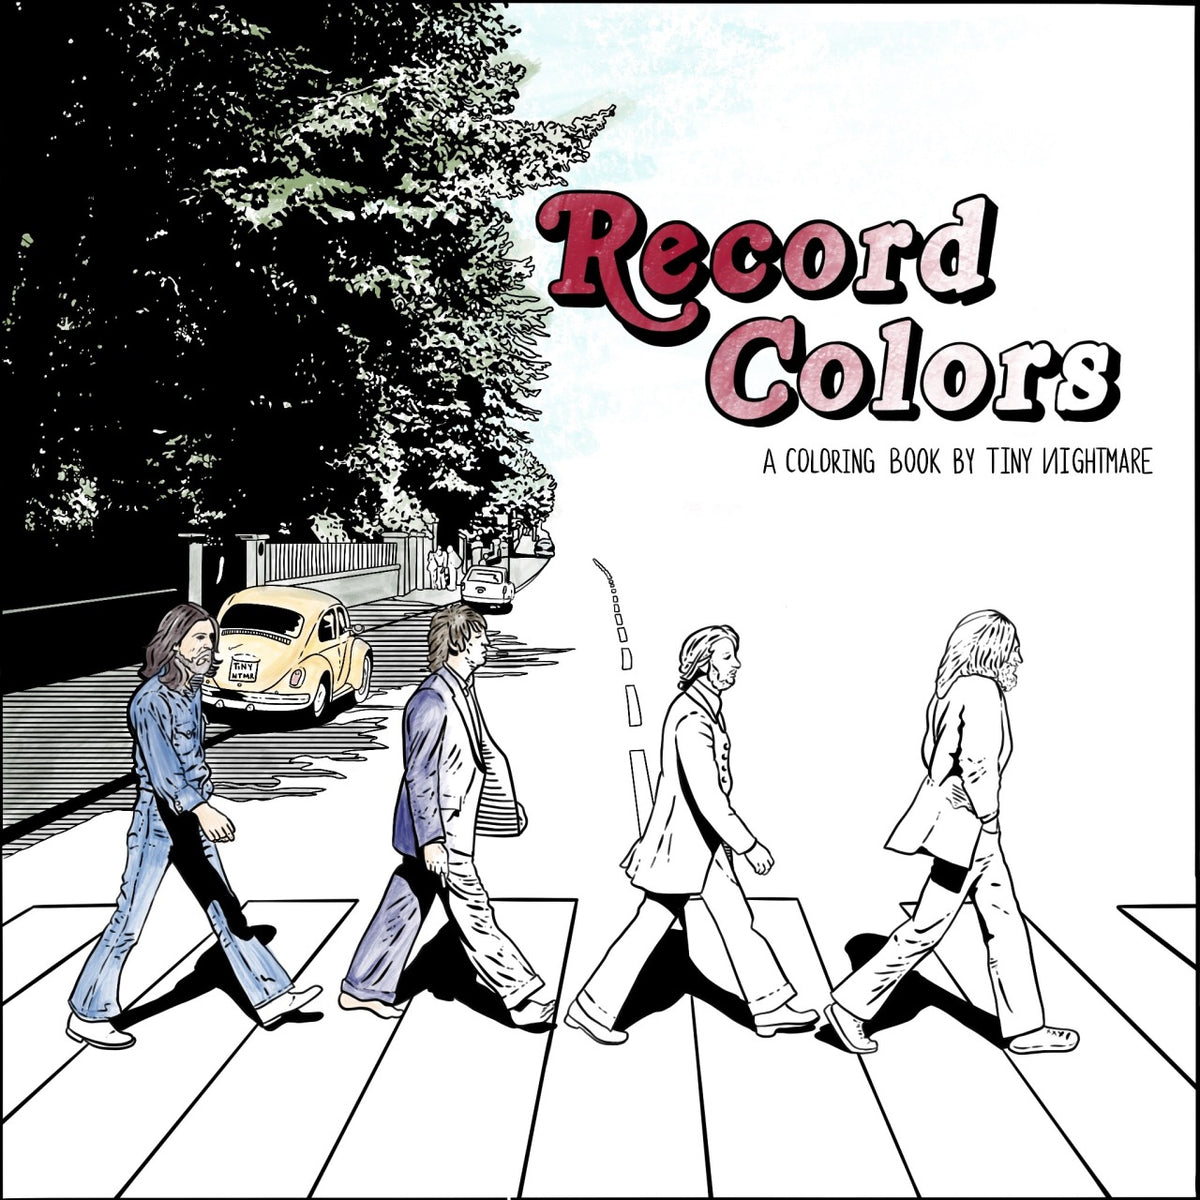 Record Colors: A Coloring Book by Tiny Nightmare